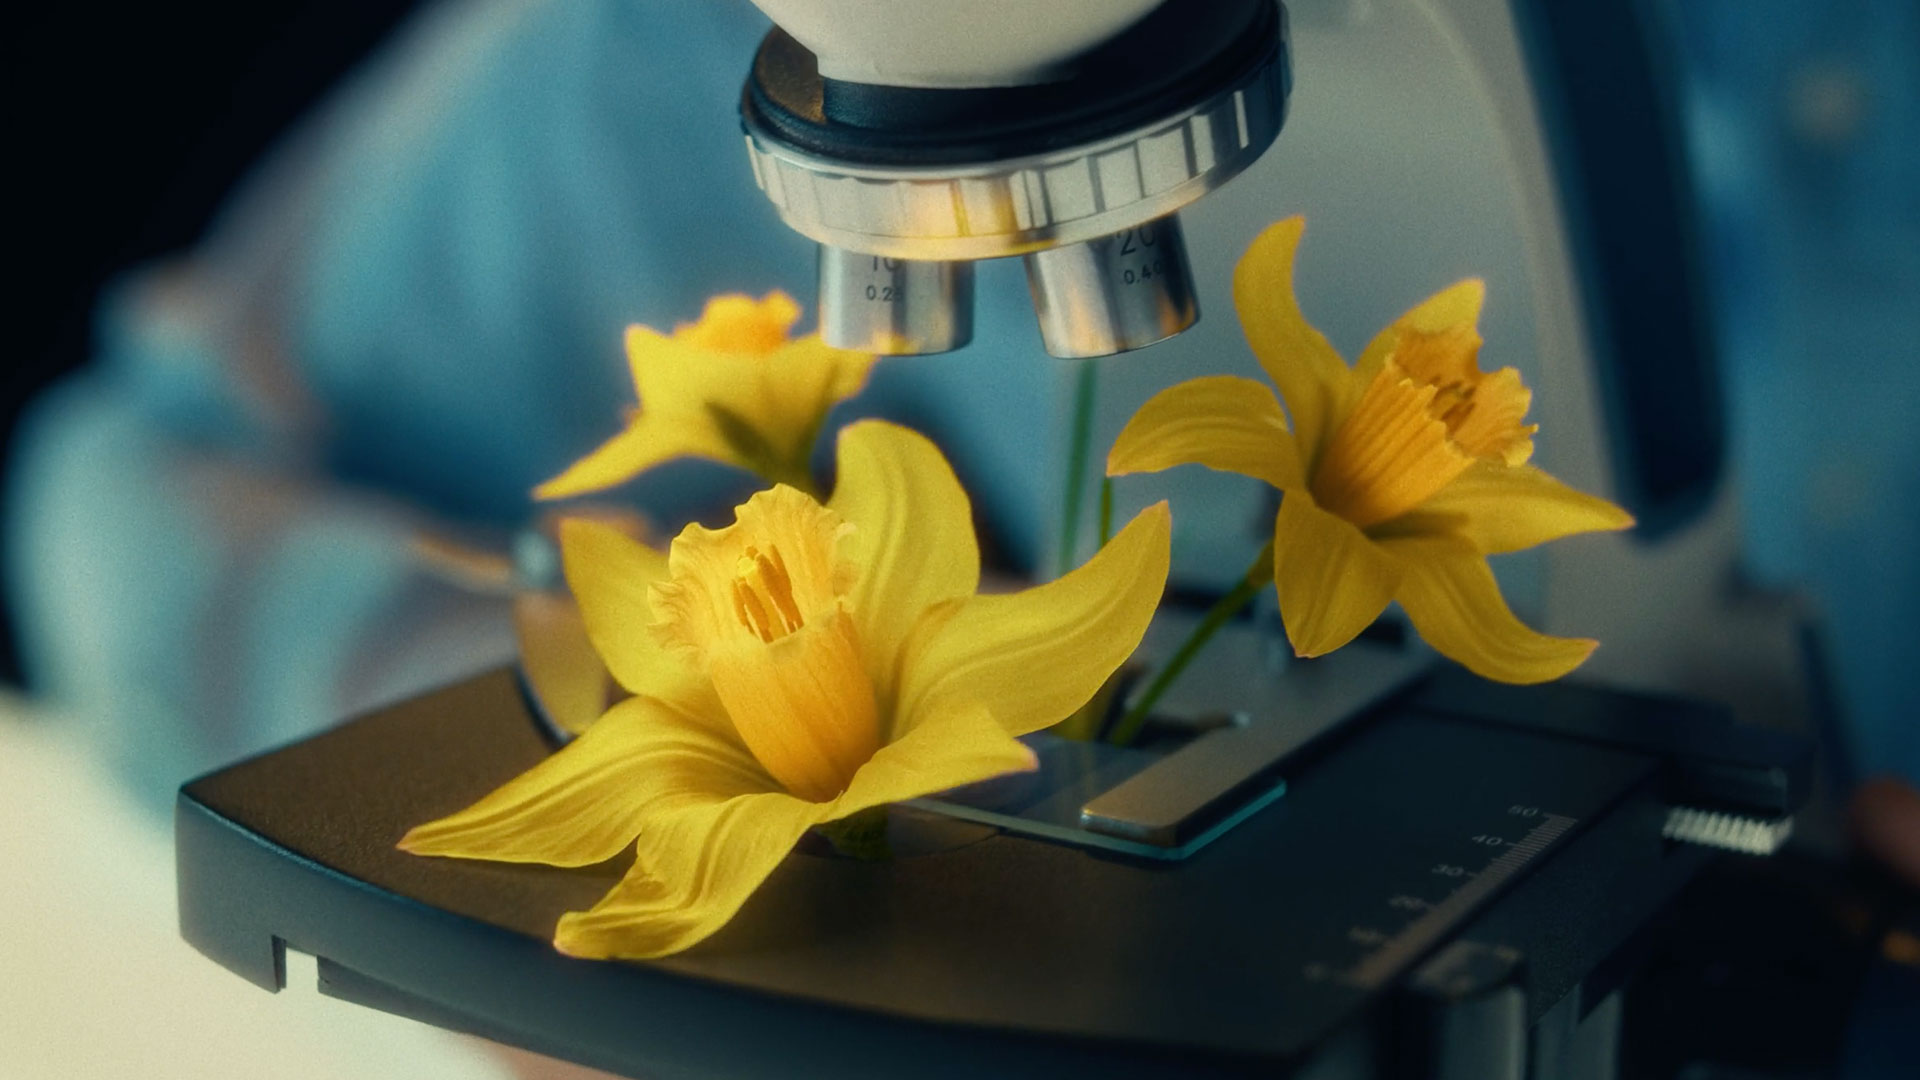 Reactiv and Impossible Studios Help Hope Bloom for Canadian Cancer Society – Motion design [Video]